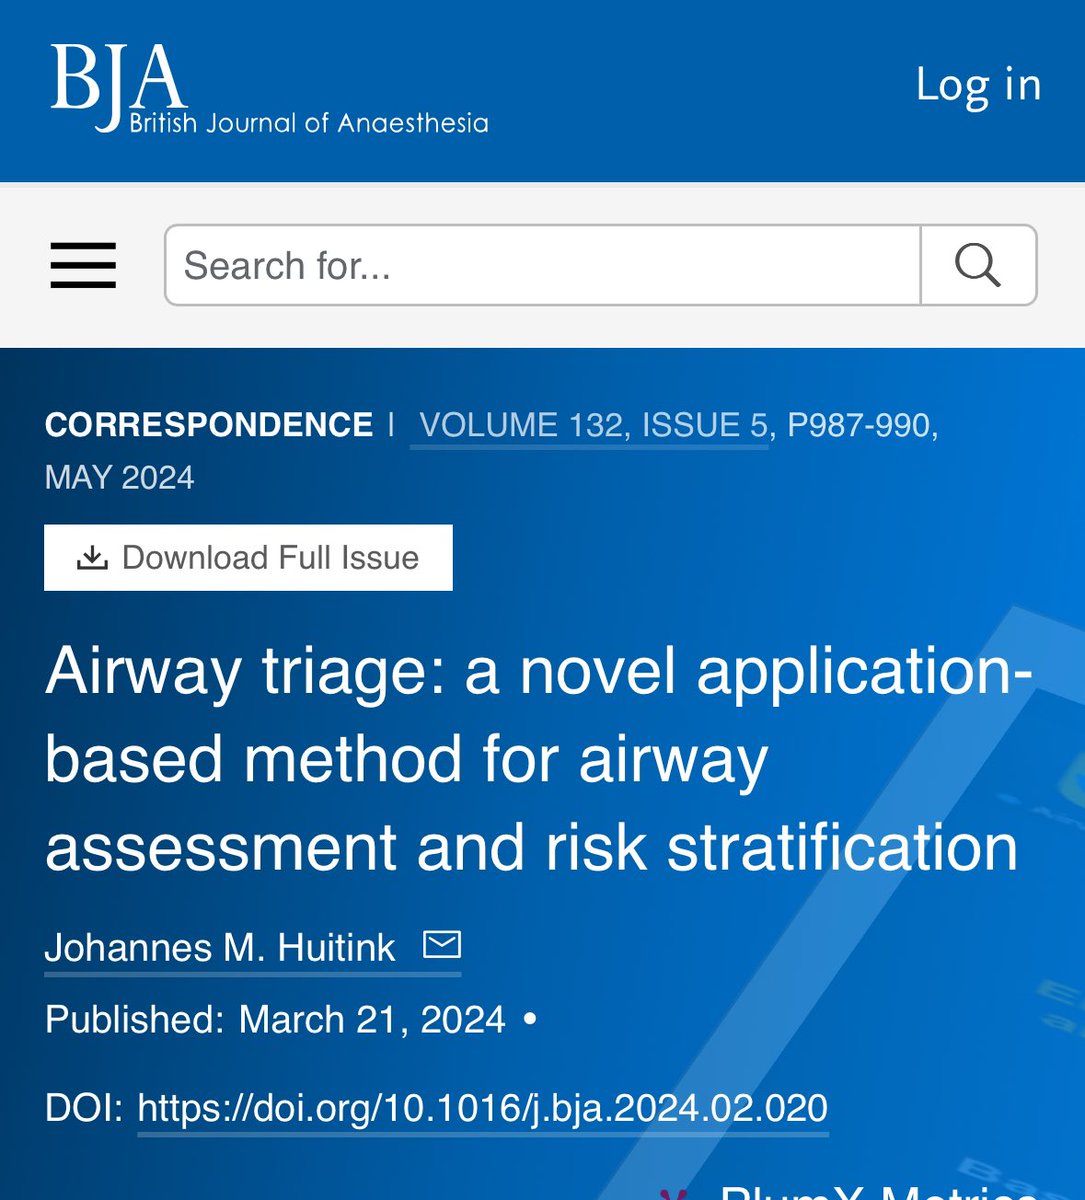 Hey #anaesthesiatrainee and #consultant #supervisor #anesthesiologist Not sure when to call for assistance after you have assessed the airway? Use the triage algorithm of @AirwayTriageApp and share the screenshot. Common sense airway management. For all team members…